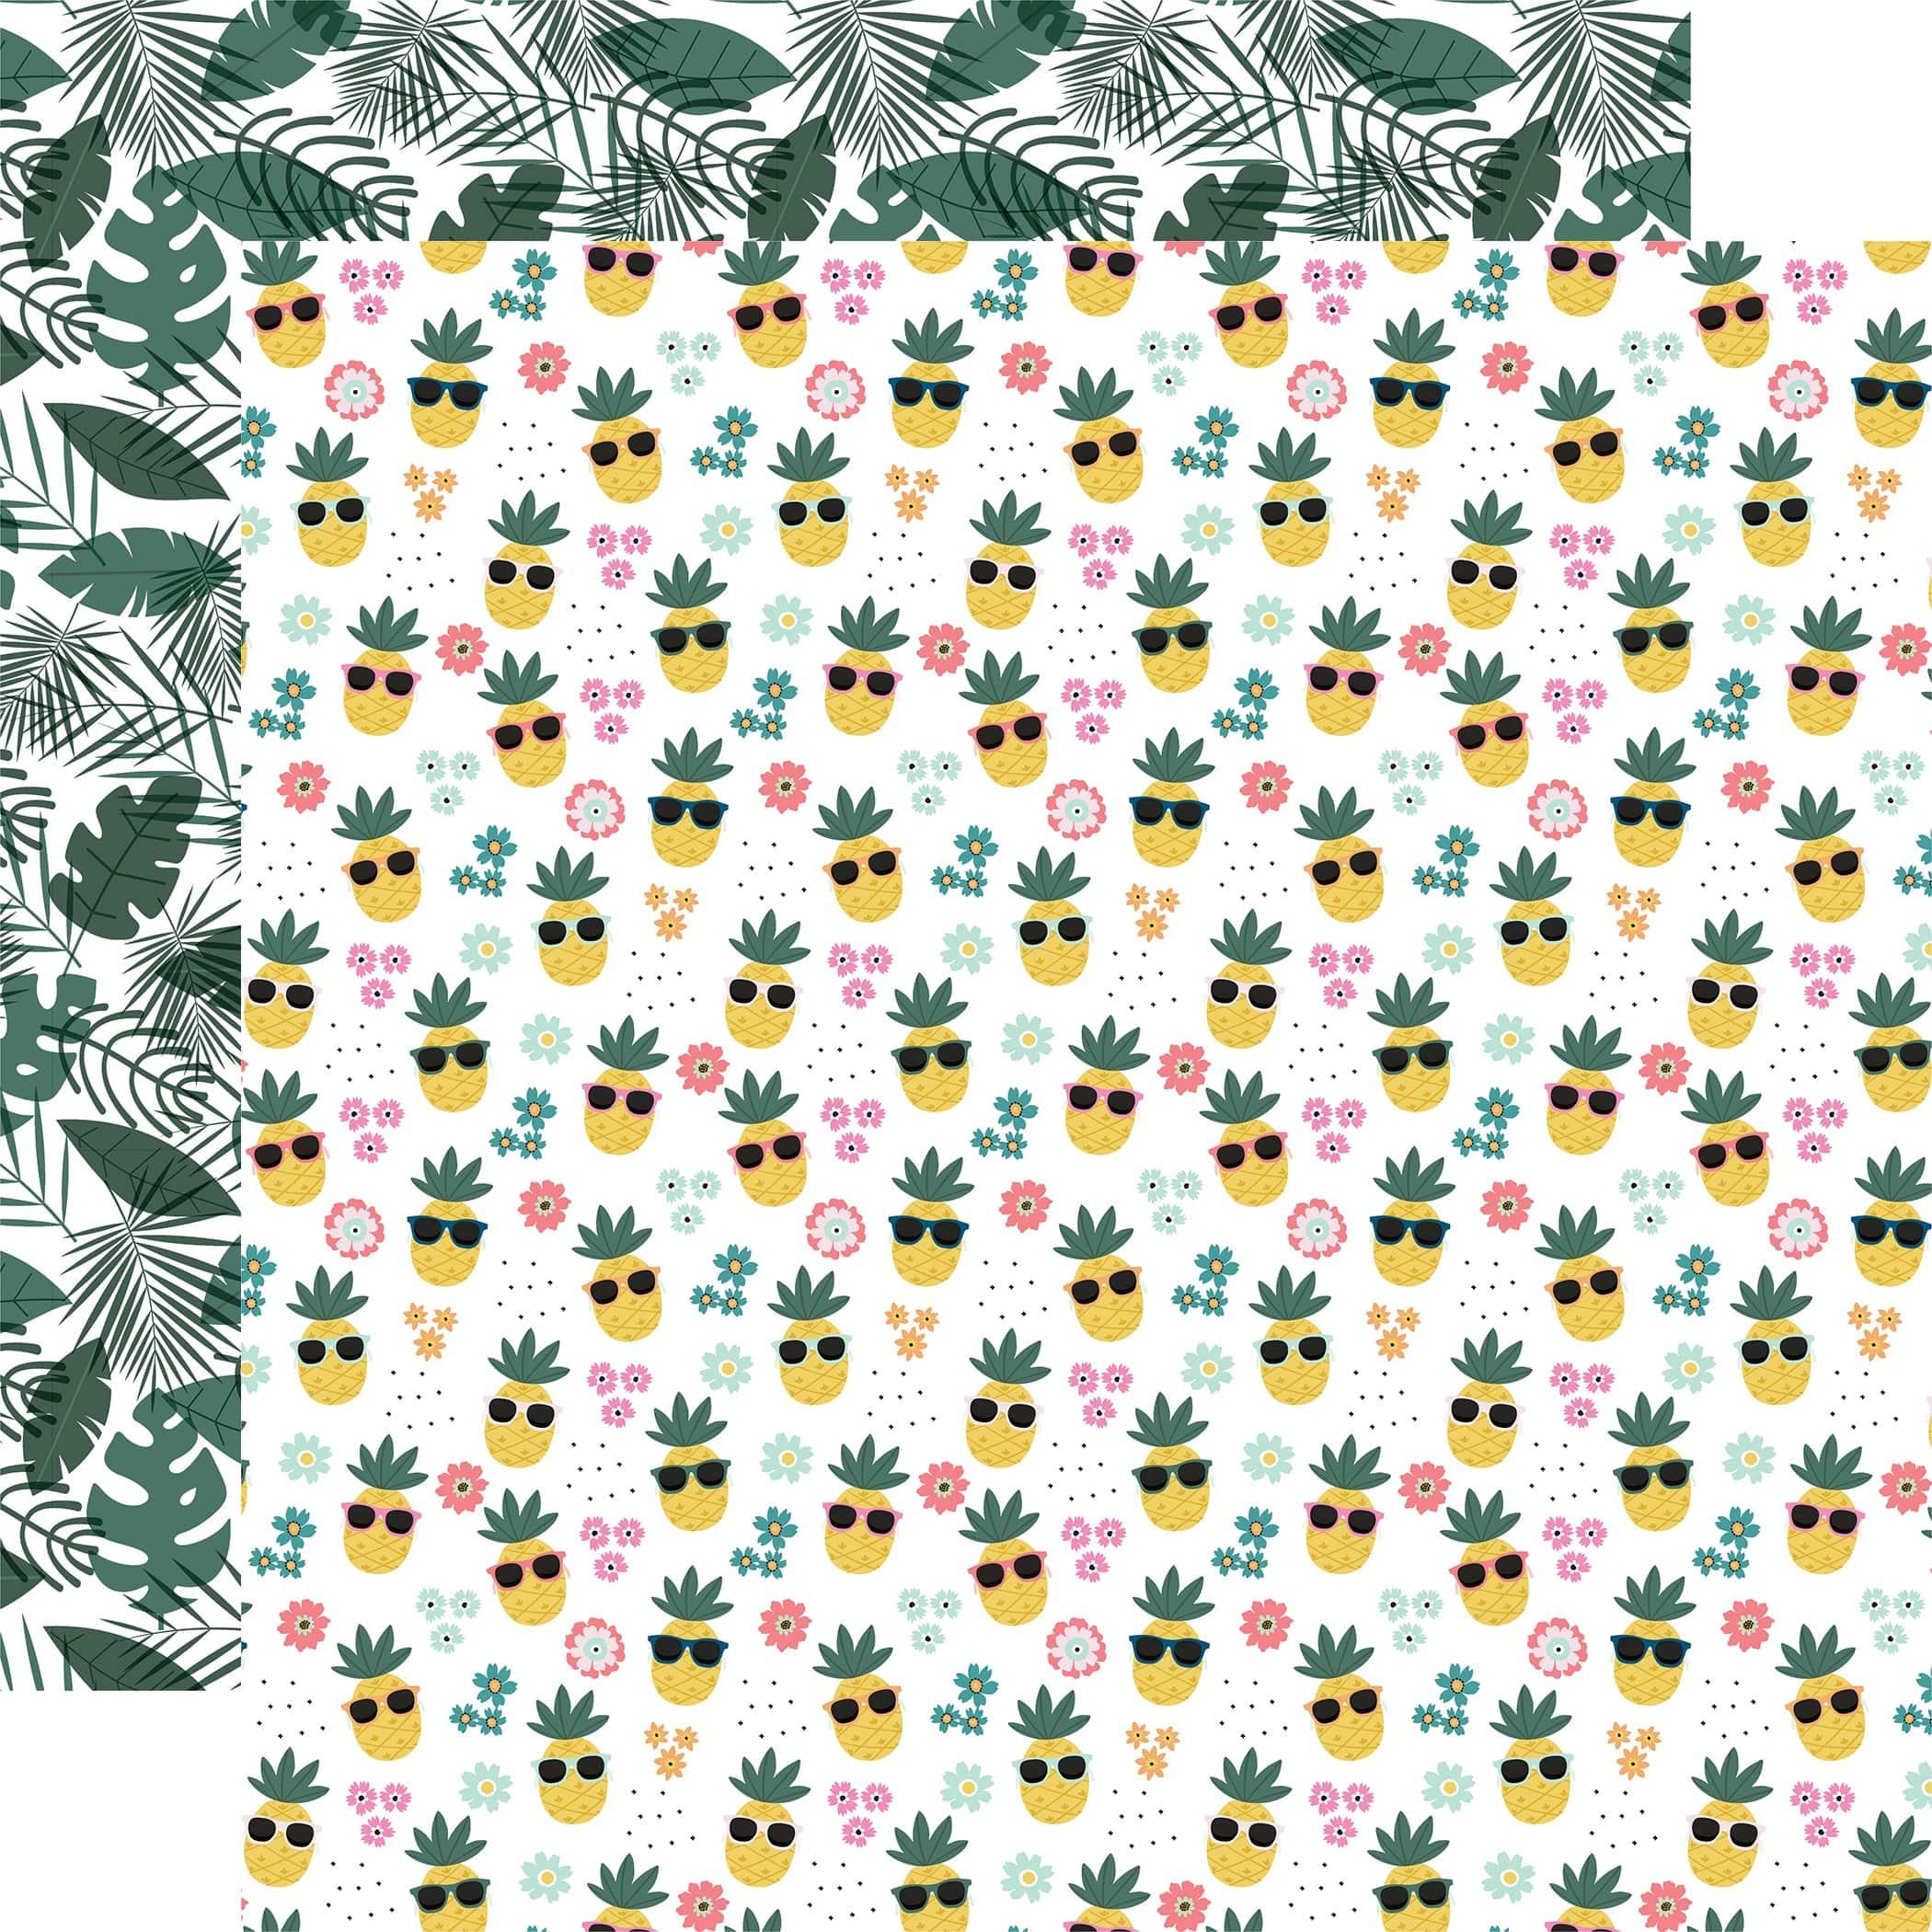 Pool Party Collection Pineapple Paradise 12 x 12 Double-Sided Scrapbook Paper by Echo Park Paper - Scrapbook Supply Companies